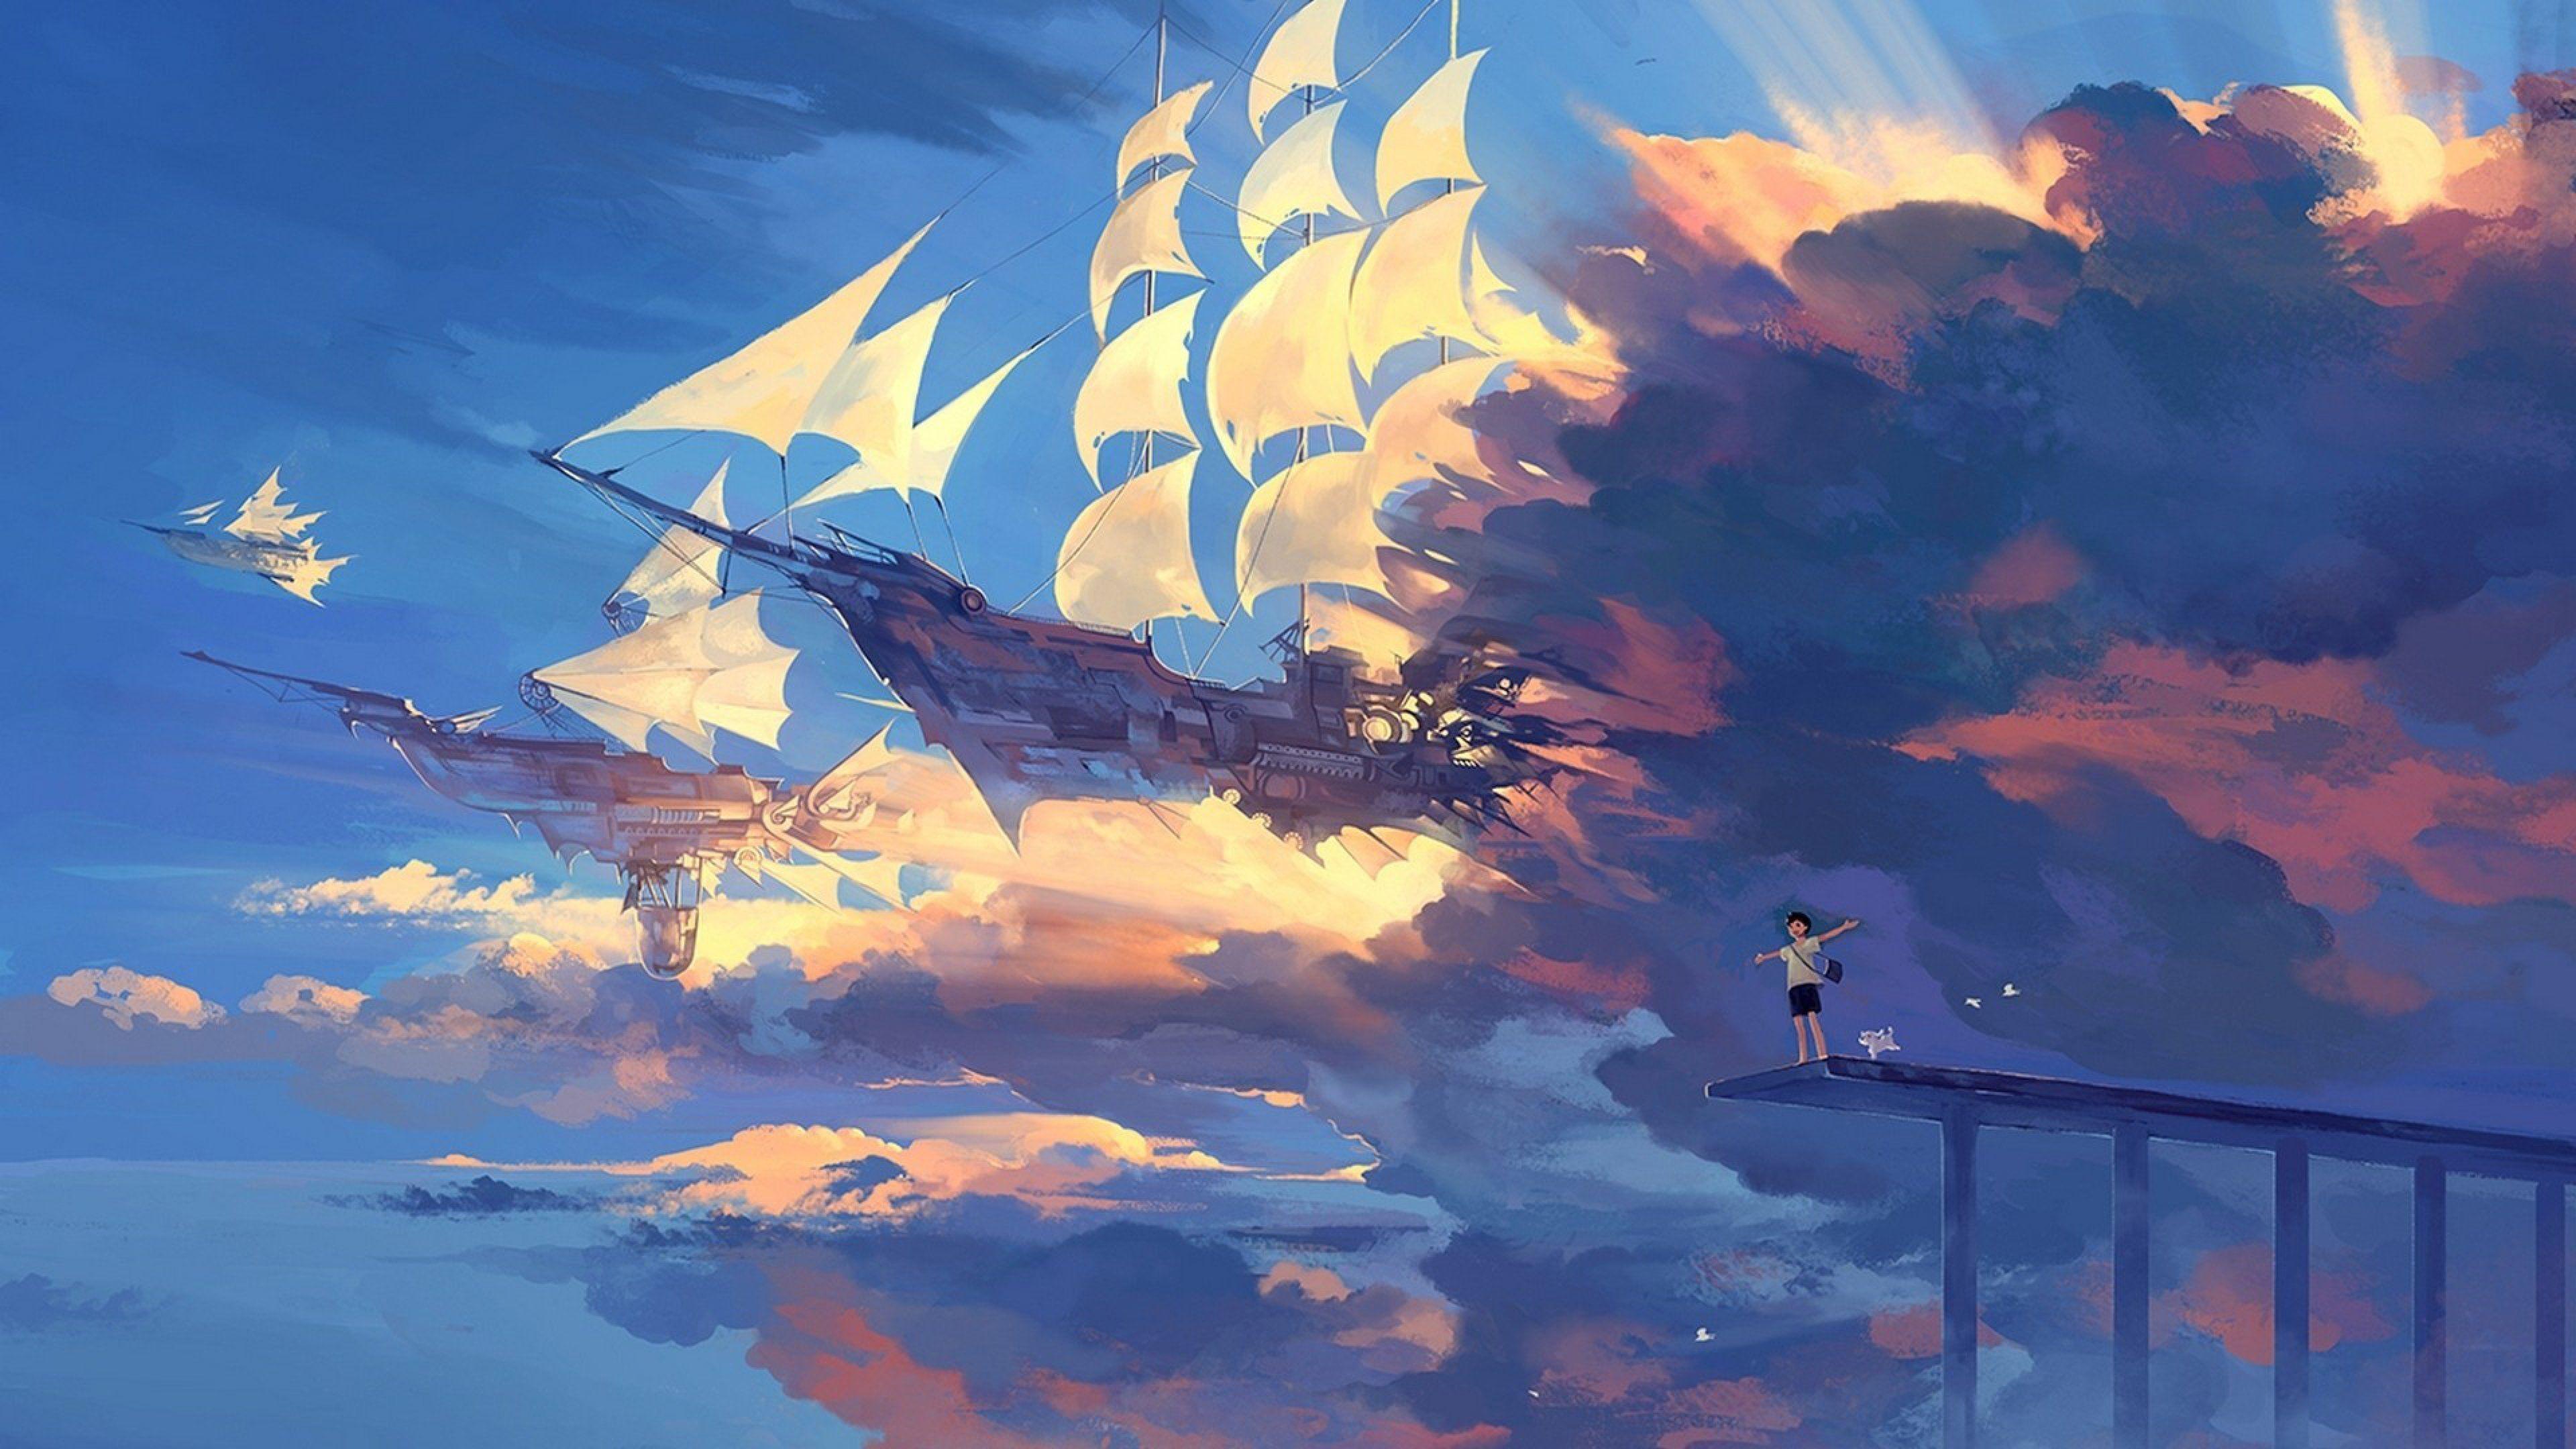 A painting of ships in the sky - Anime landscape, anime, blue anime